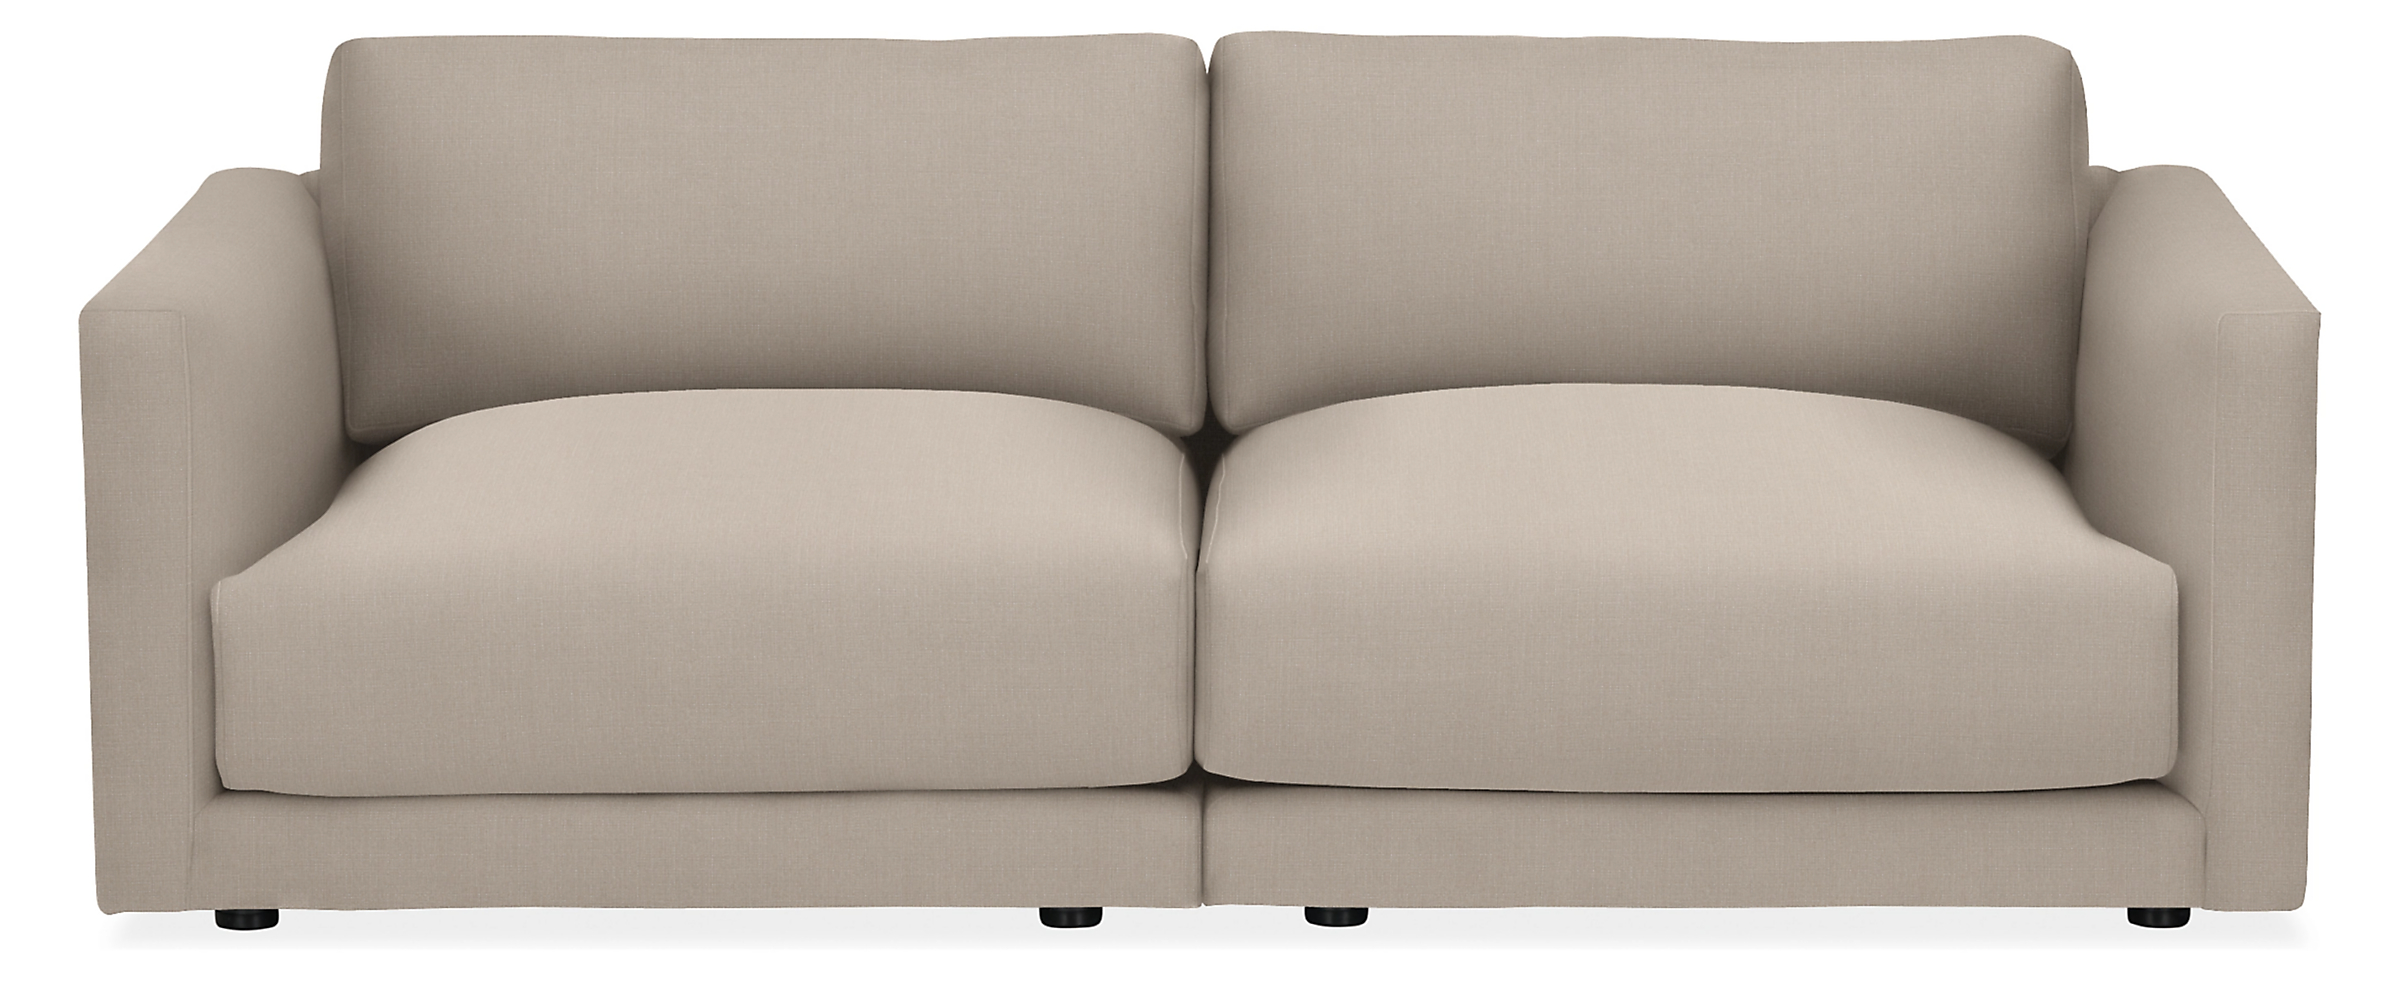 Clemens 74" Two-Piece Modular Sofa in Hines Oatmeal